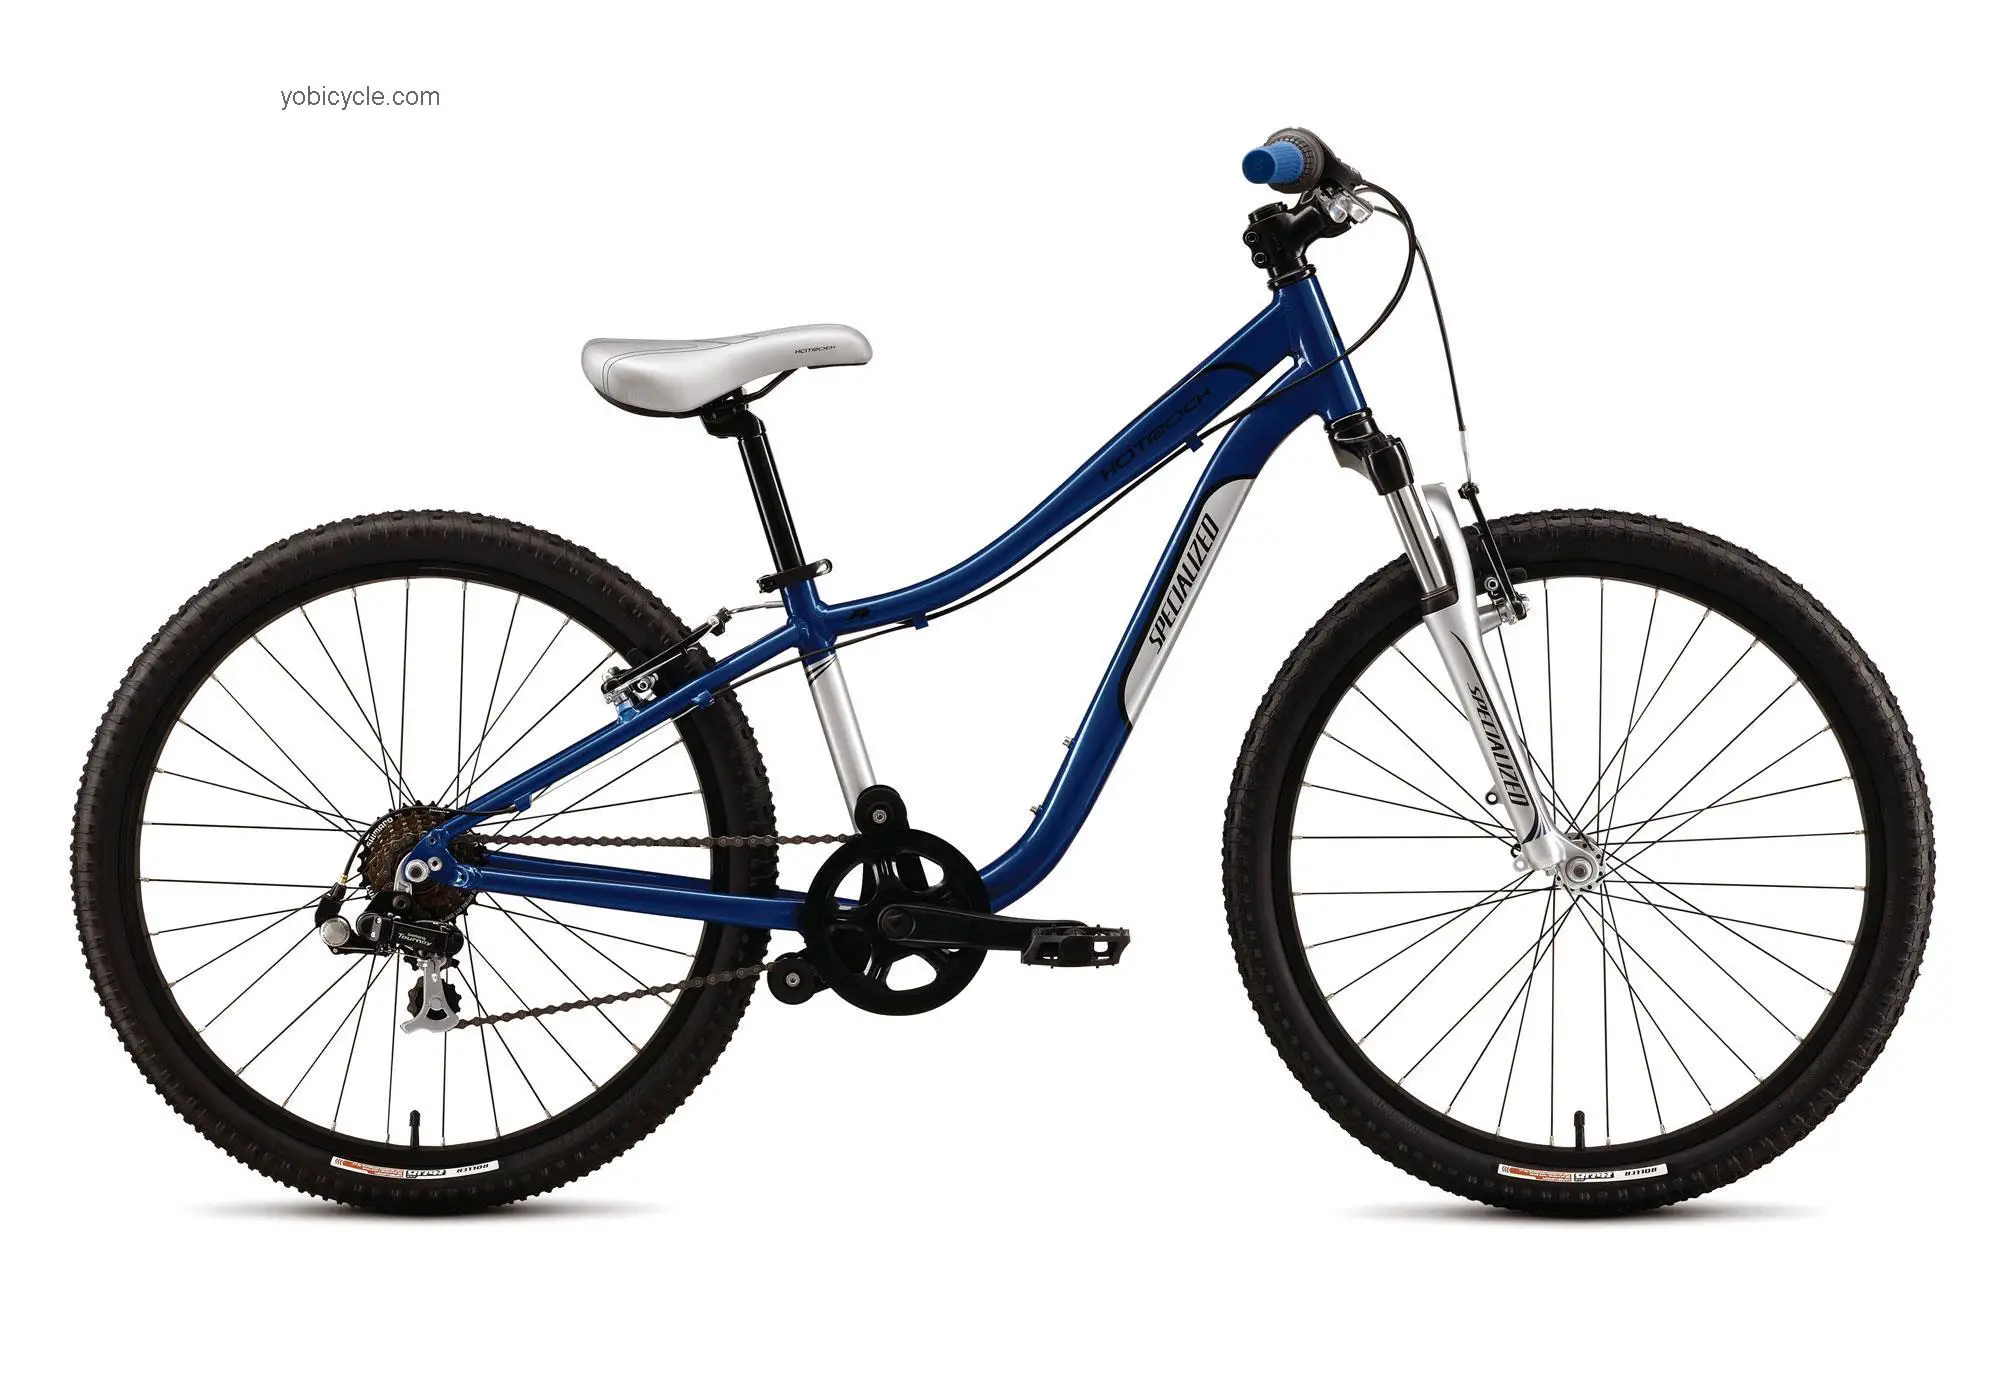 Specialized Hotrock 24 7-speed Boys 2012 comparison online with competitors